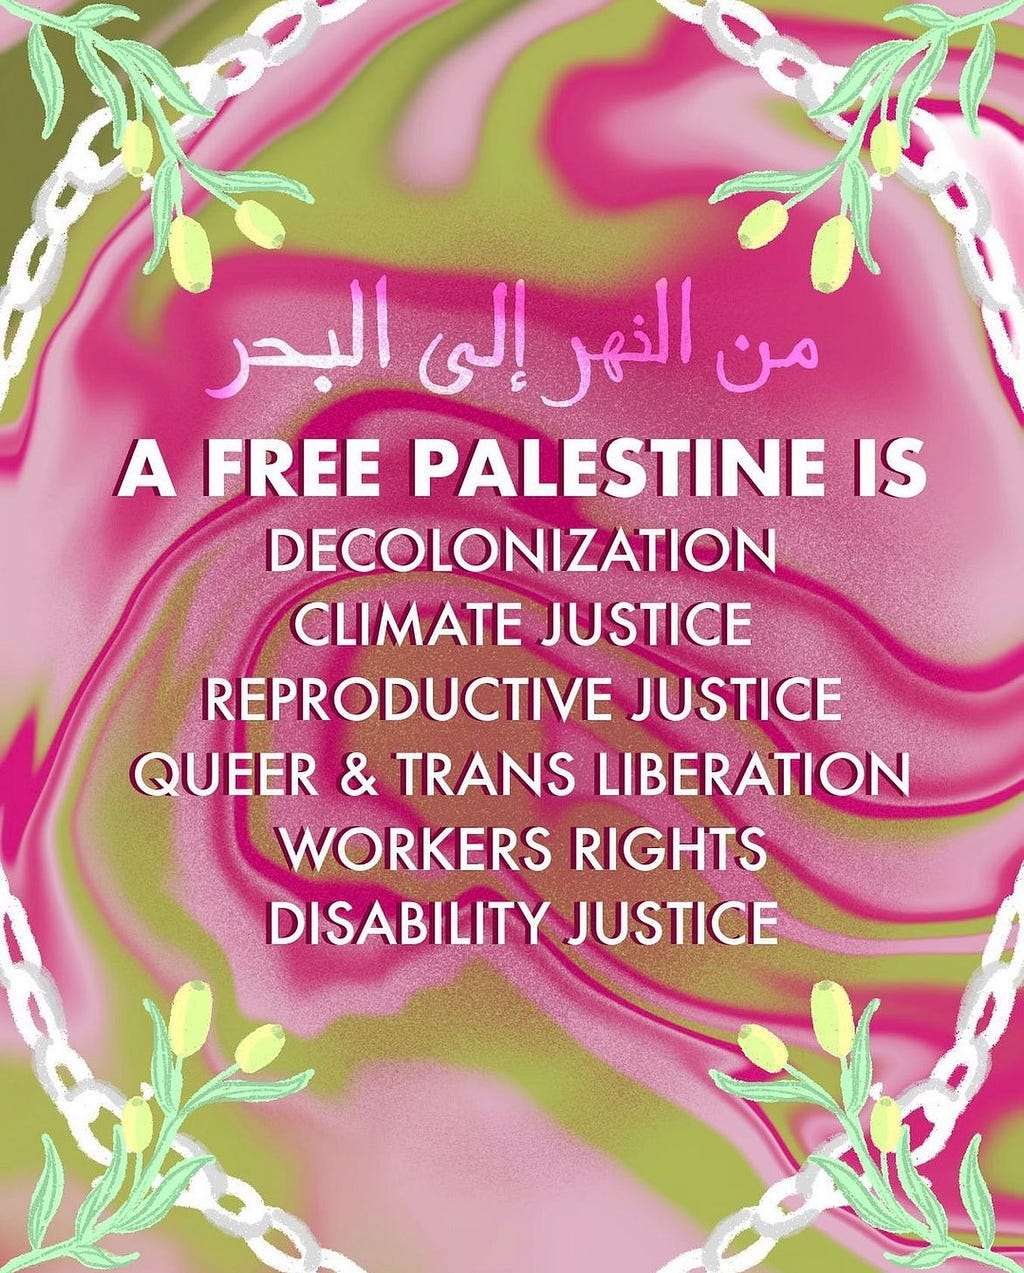 A meme with a pink and green swirling lines, flowers and chains with the words in Arabic: “من الزهر الي البحر“ which translates to “From flowers to the sea” and the words in English: “A Free Palestine is Decolonization Climate Justice Reproductive Justice Queer & Trans Liberation Workers Rights Disability Justice”